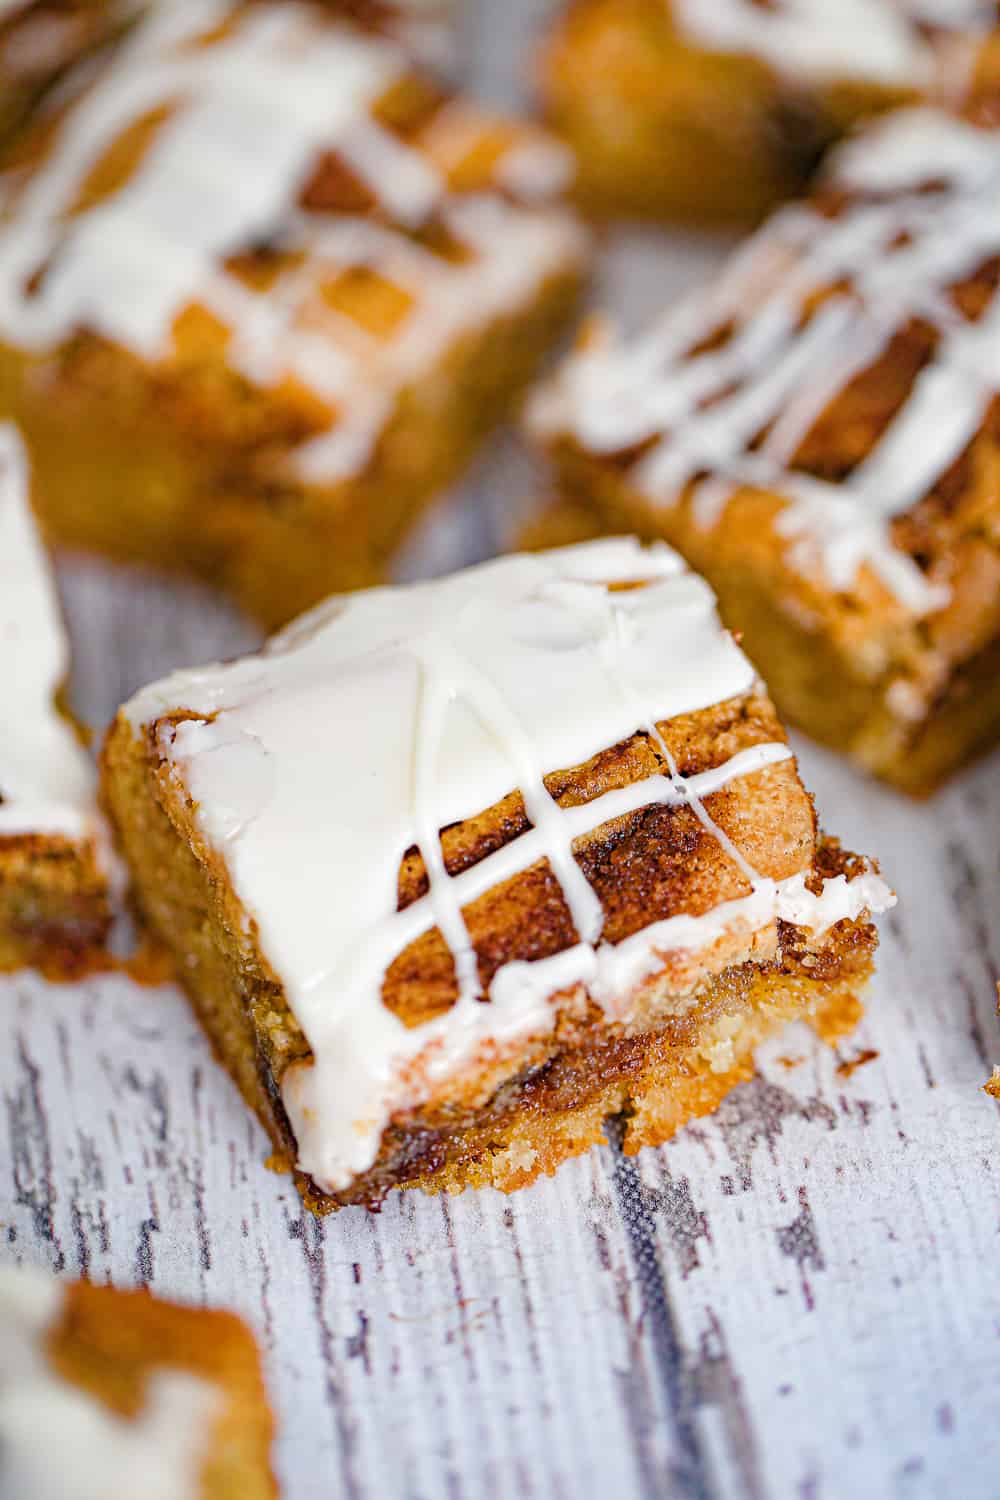 These scrumptious Cinnamon Roll Blondies are blondies with a buttery, cinnamon-sugar mixture swirled in and topped with a simple vanilla cream glaze.